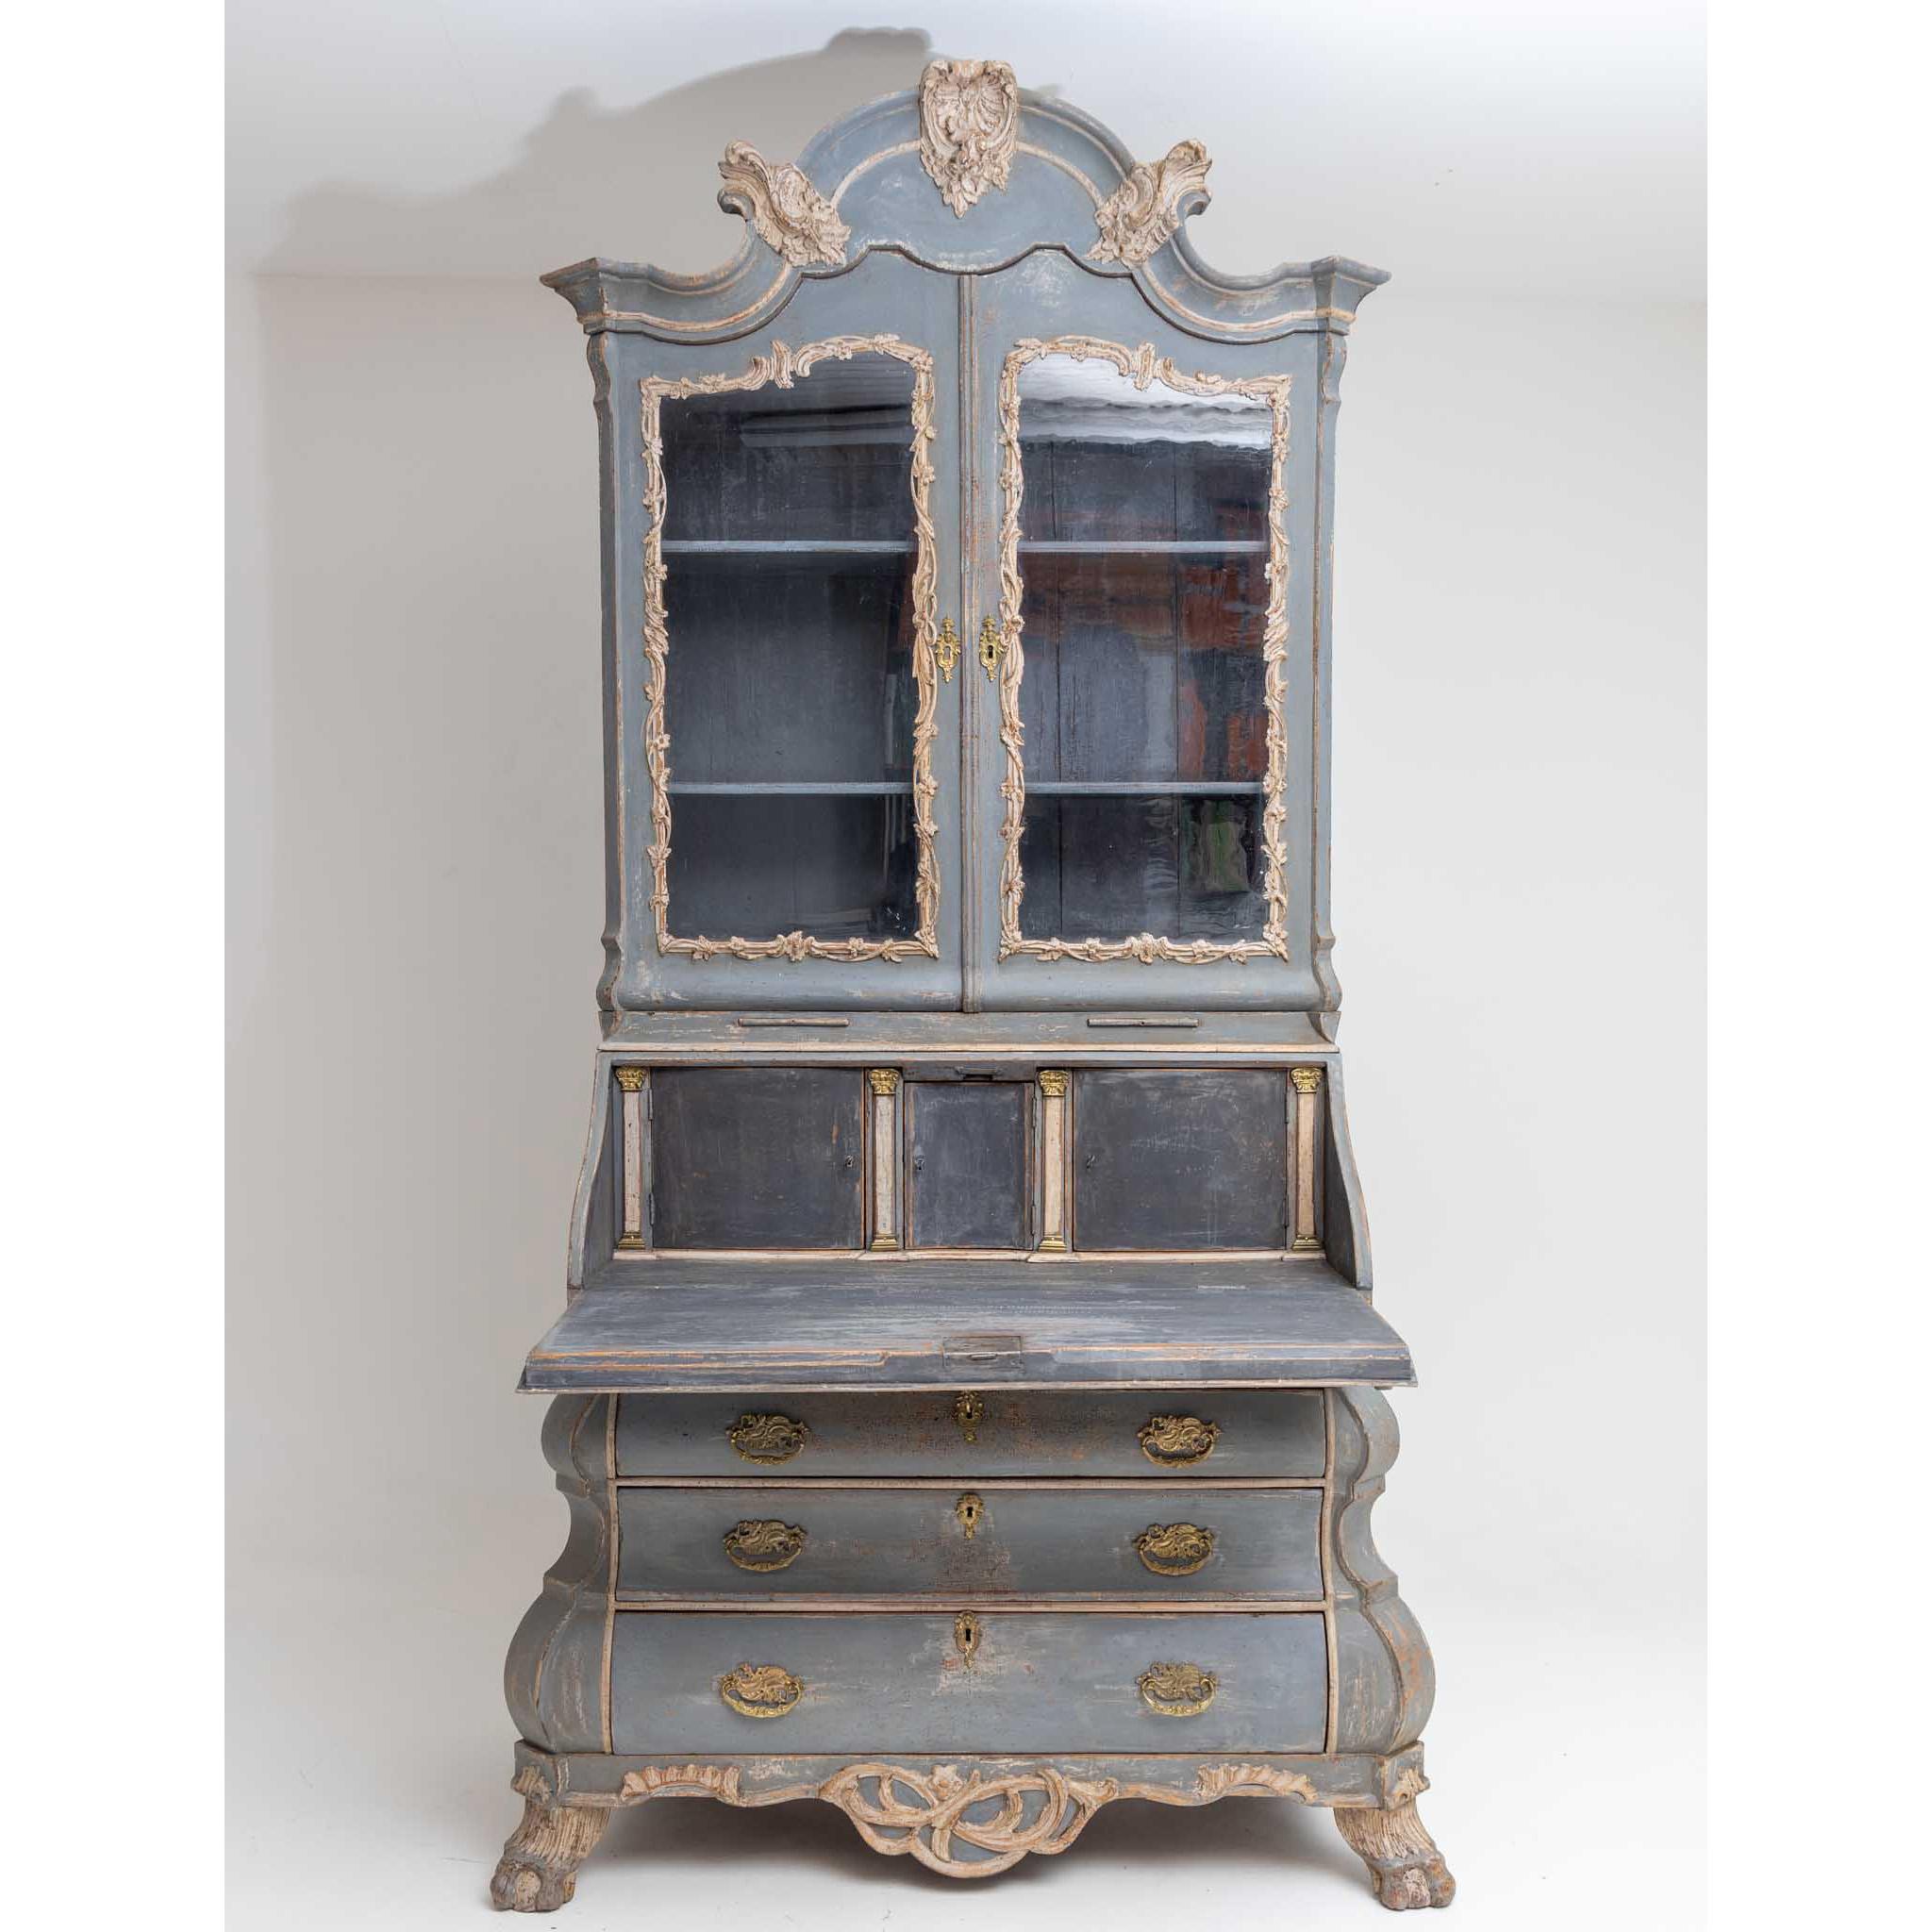 Large Dutch bureau with four-drawer chest of drawers and typical multi-profiled corner solution on claw feet with carved frame. Behind the wavy slanted flap are three lockable single-door compartments with pilaster decoration. Above this rises a